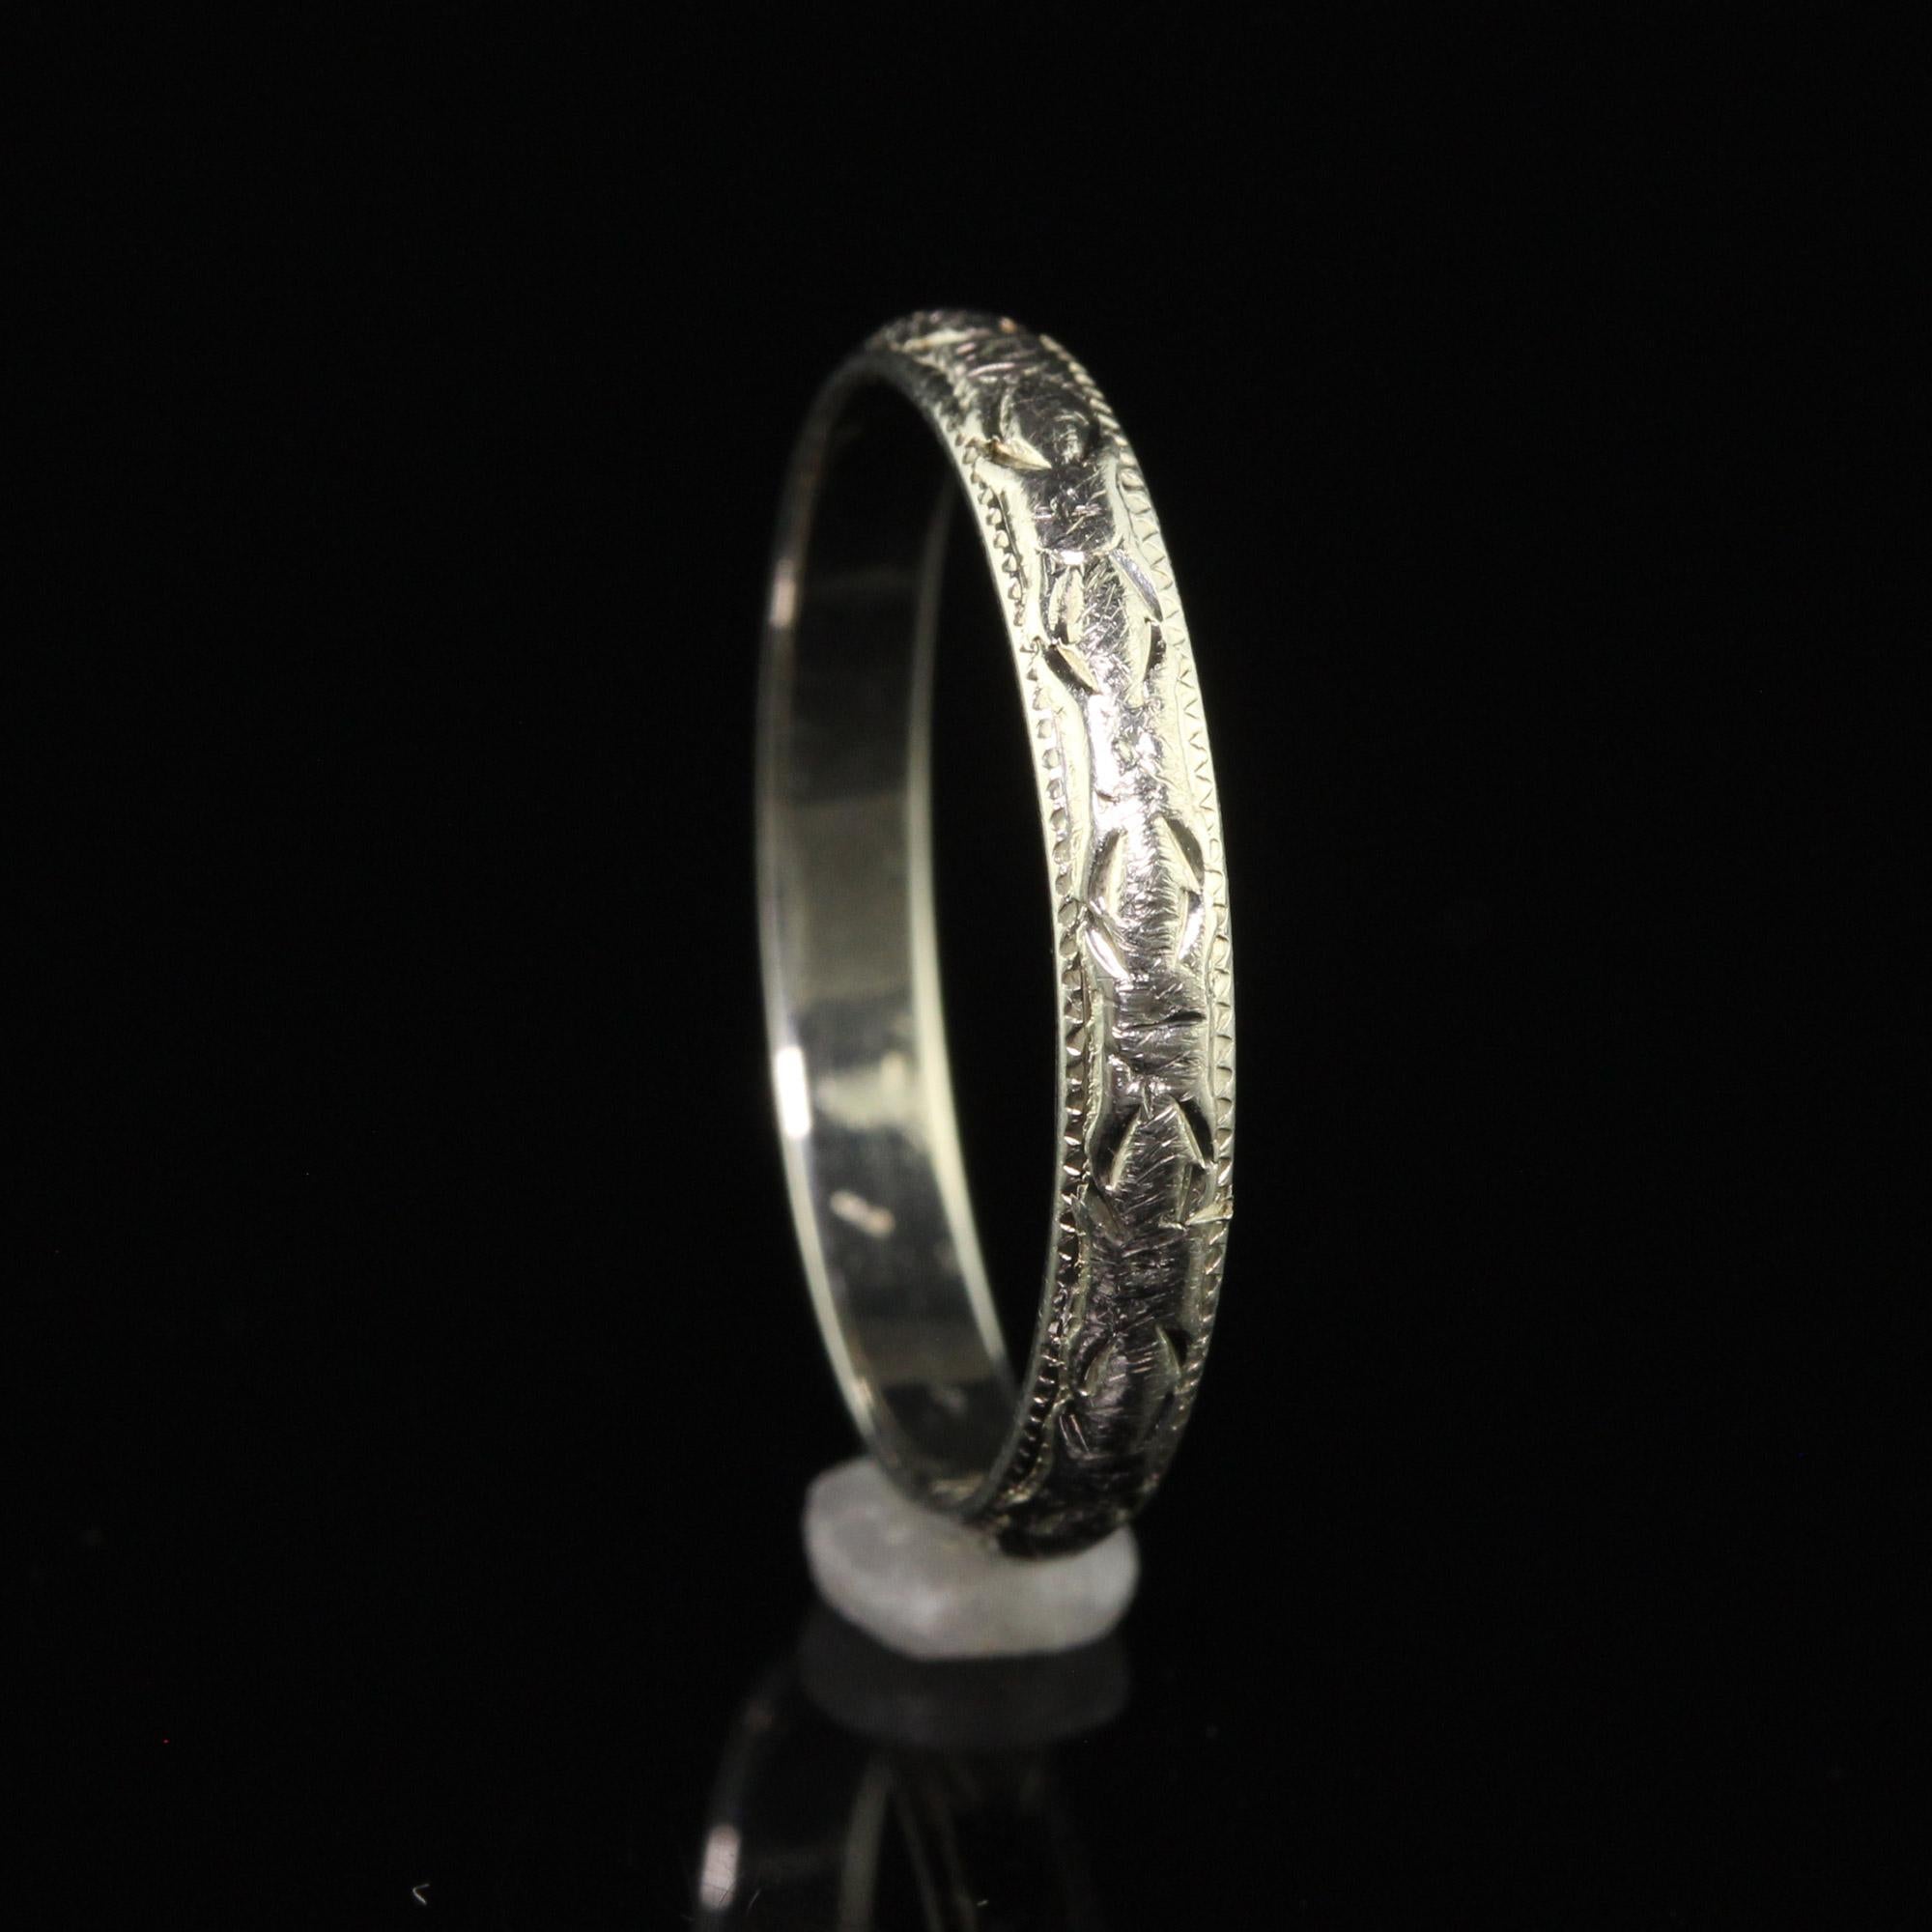 Antique Art Deco 18K White Gold Engraved Wedding Band - Size 6 For Sale 1